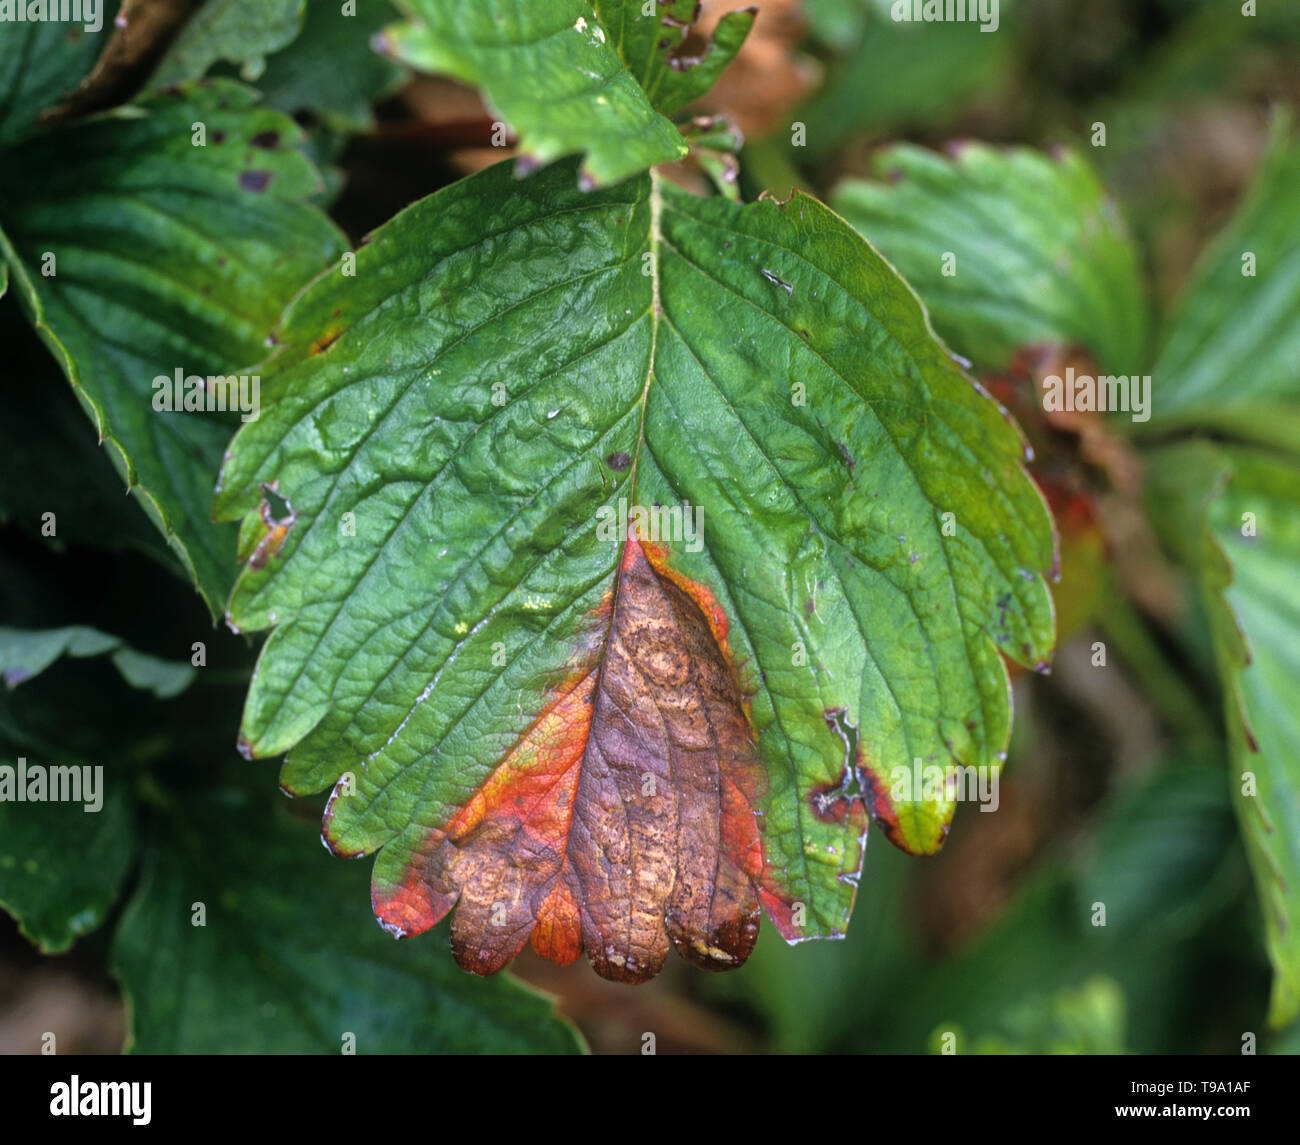 Leaf blight (Phomopsis obscurans)  common fungal disease causing a V-shaped lesion with pycnidia on a strawberry leaf Stock Photo